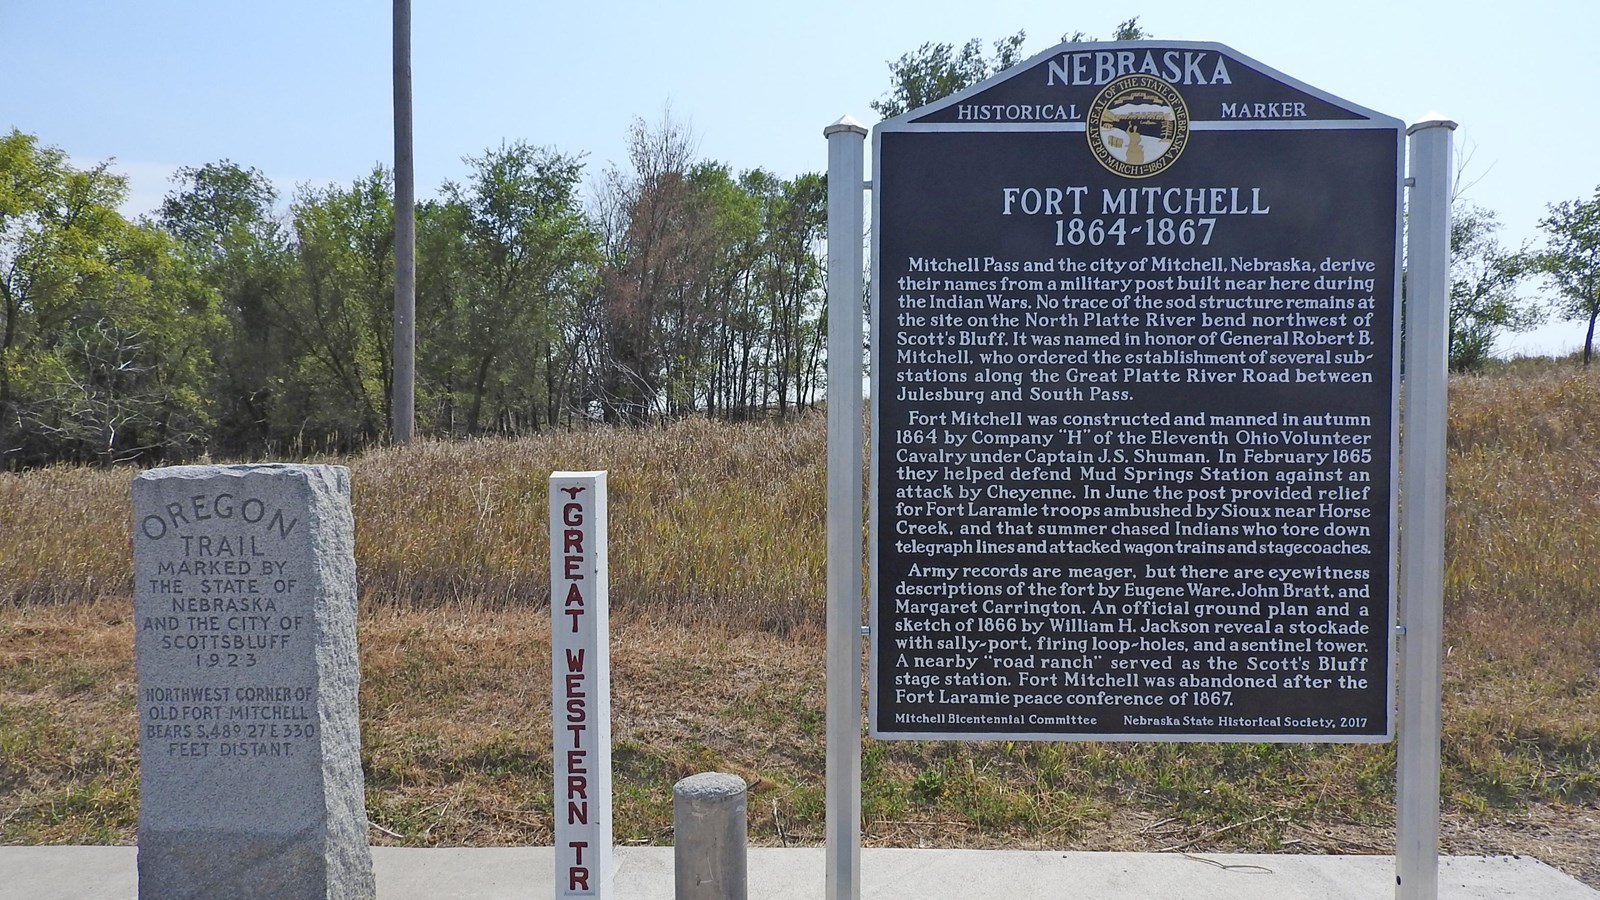 A monument to the Oregon Trail is seen next to a historical sign about Fort Mitchell